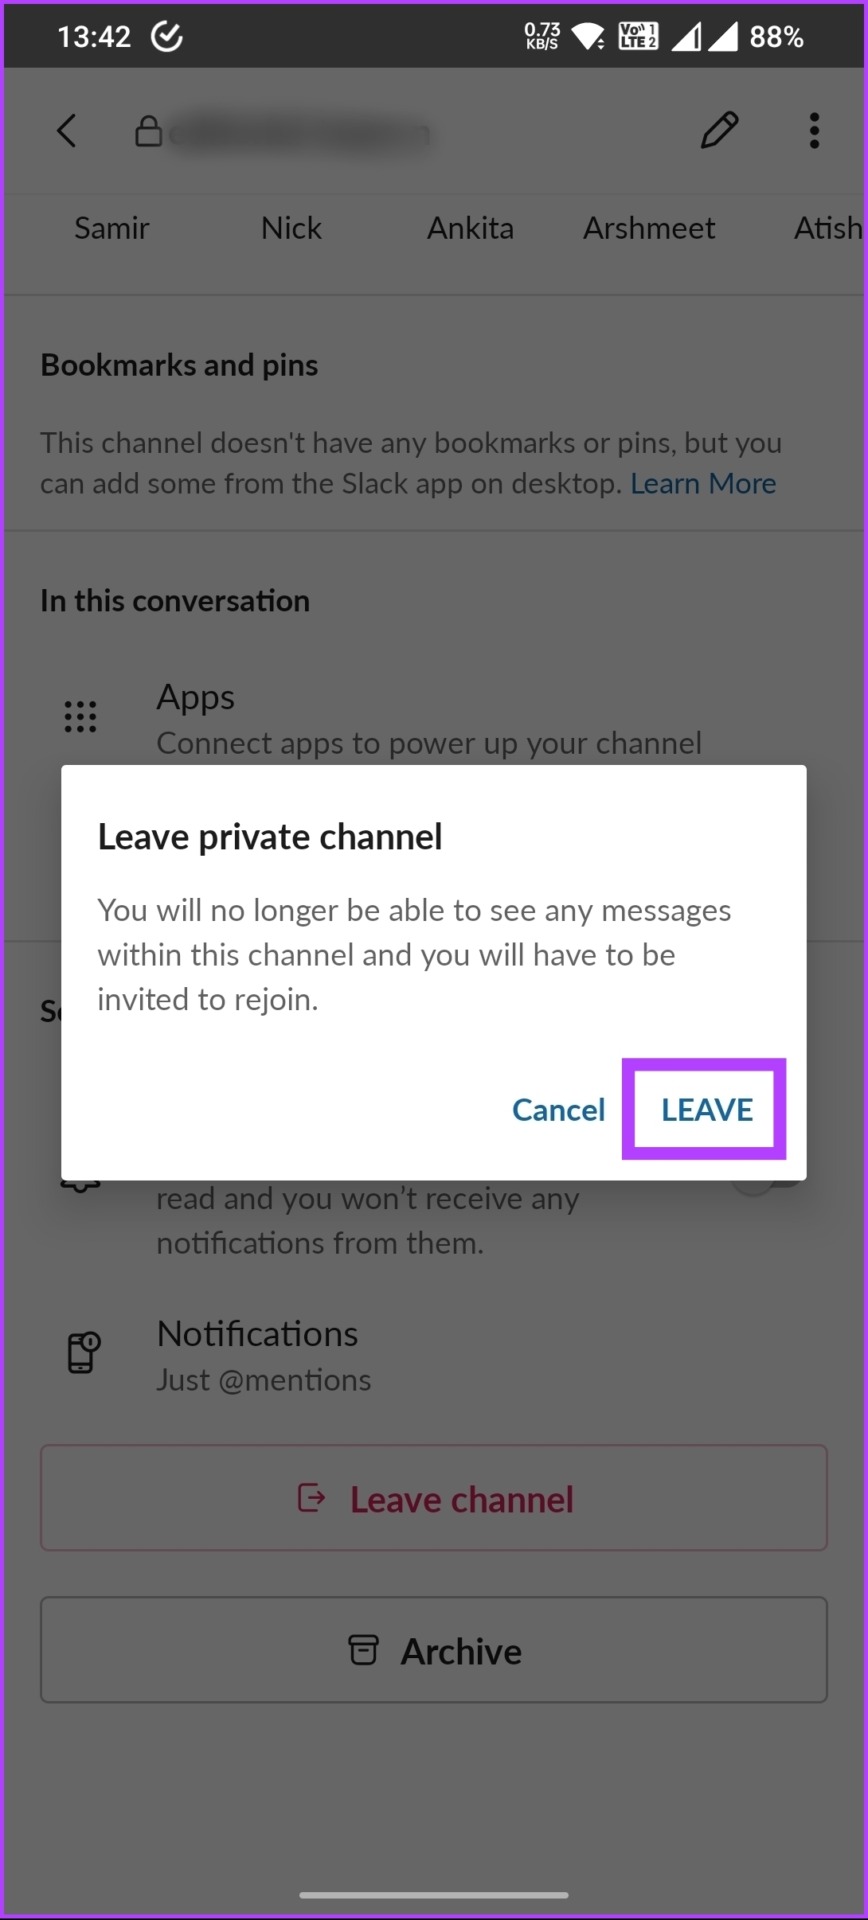 Select Leave in the 'Leave private channel' prompt